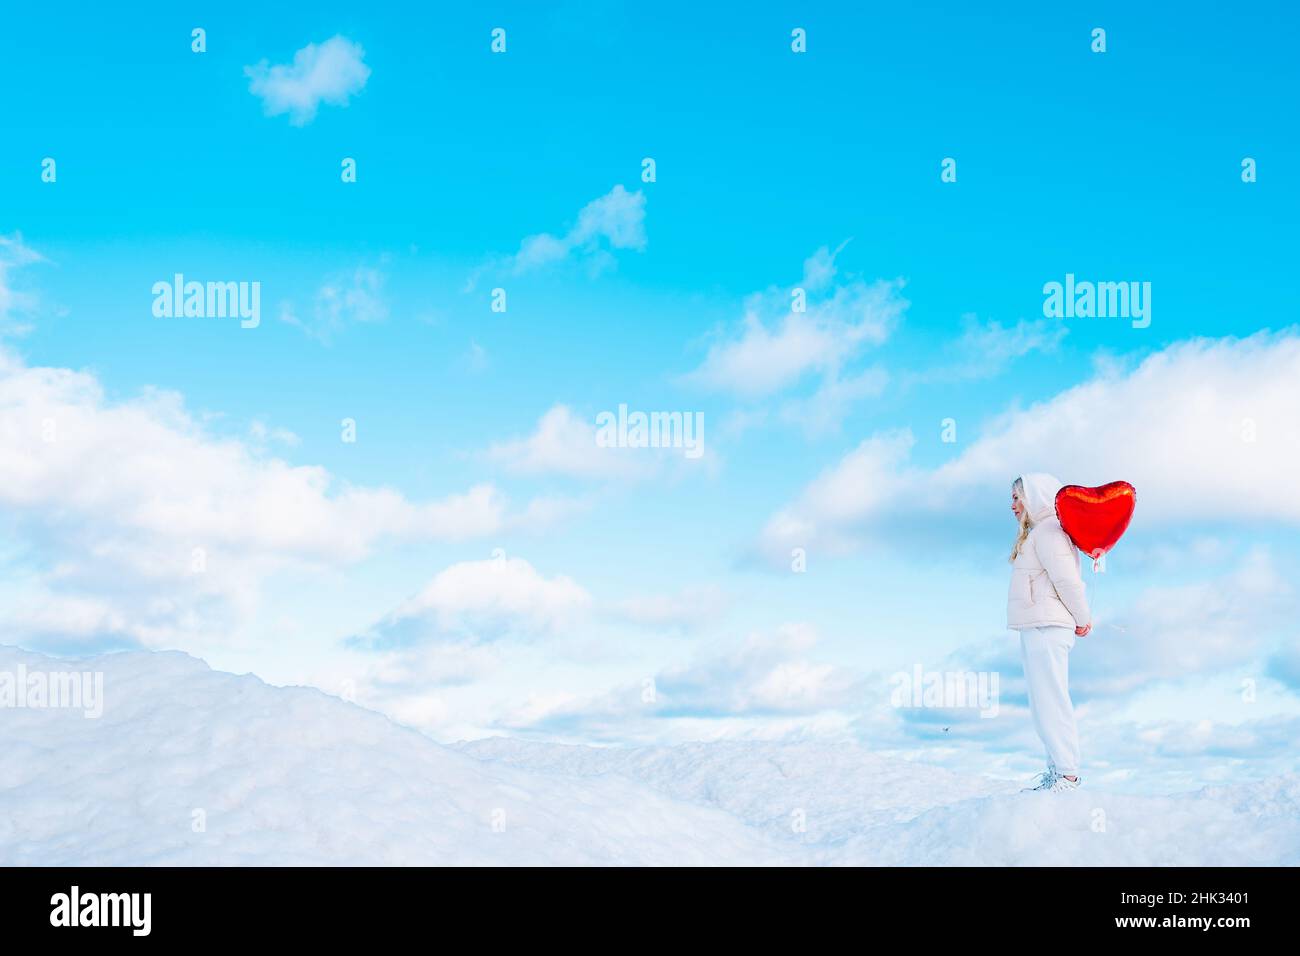 Woman with red heart-shaped balloon standing alone on snow covered hill Stock Photo